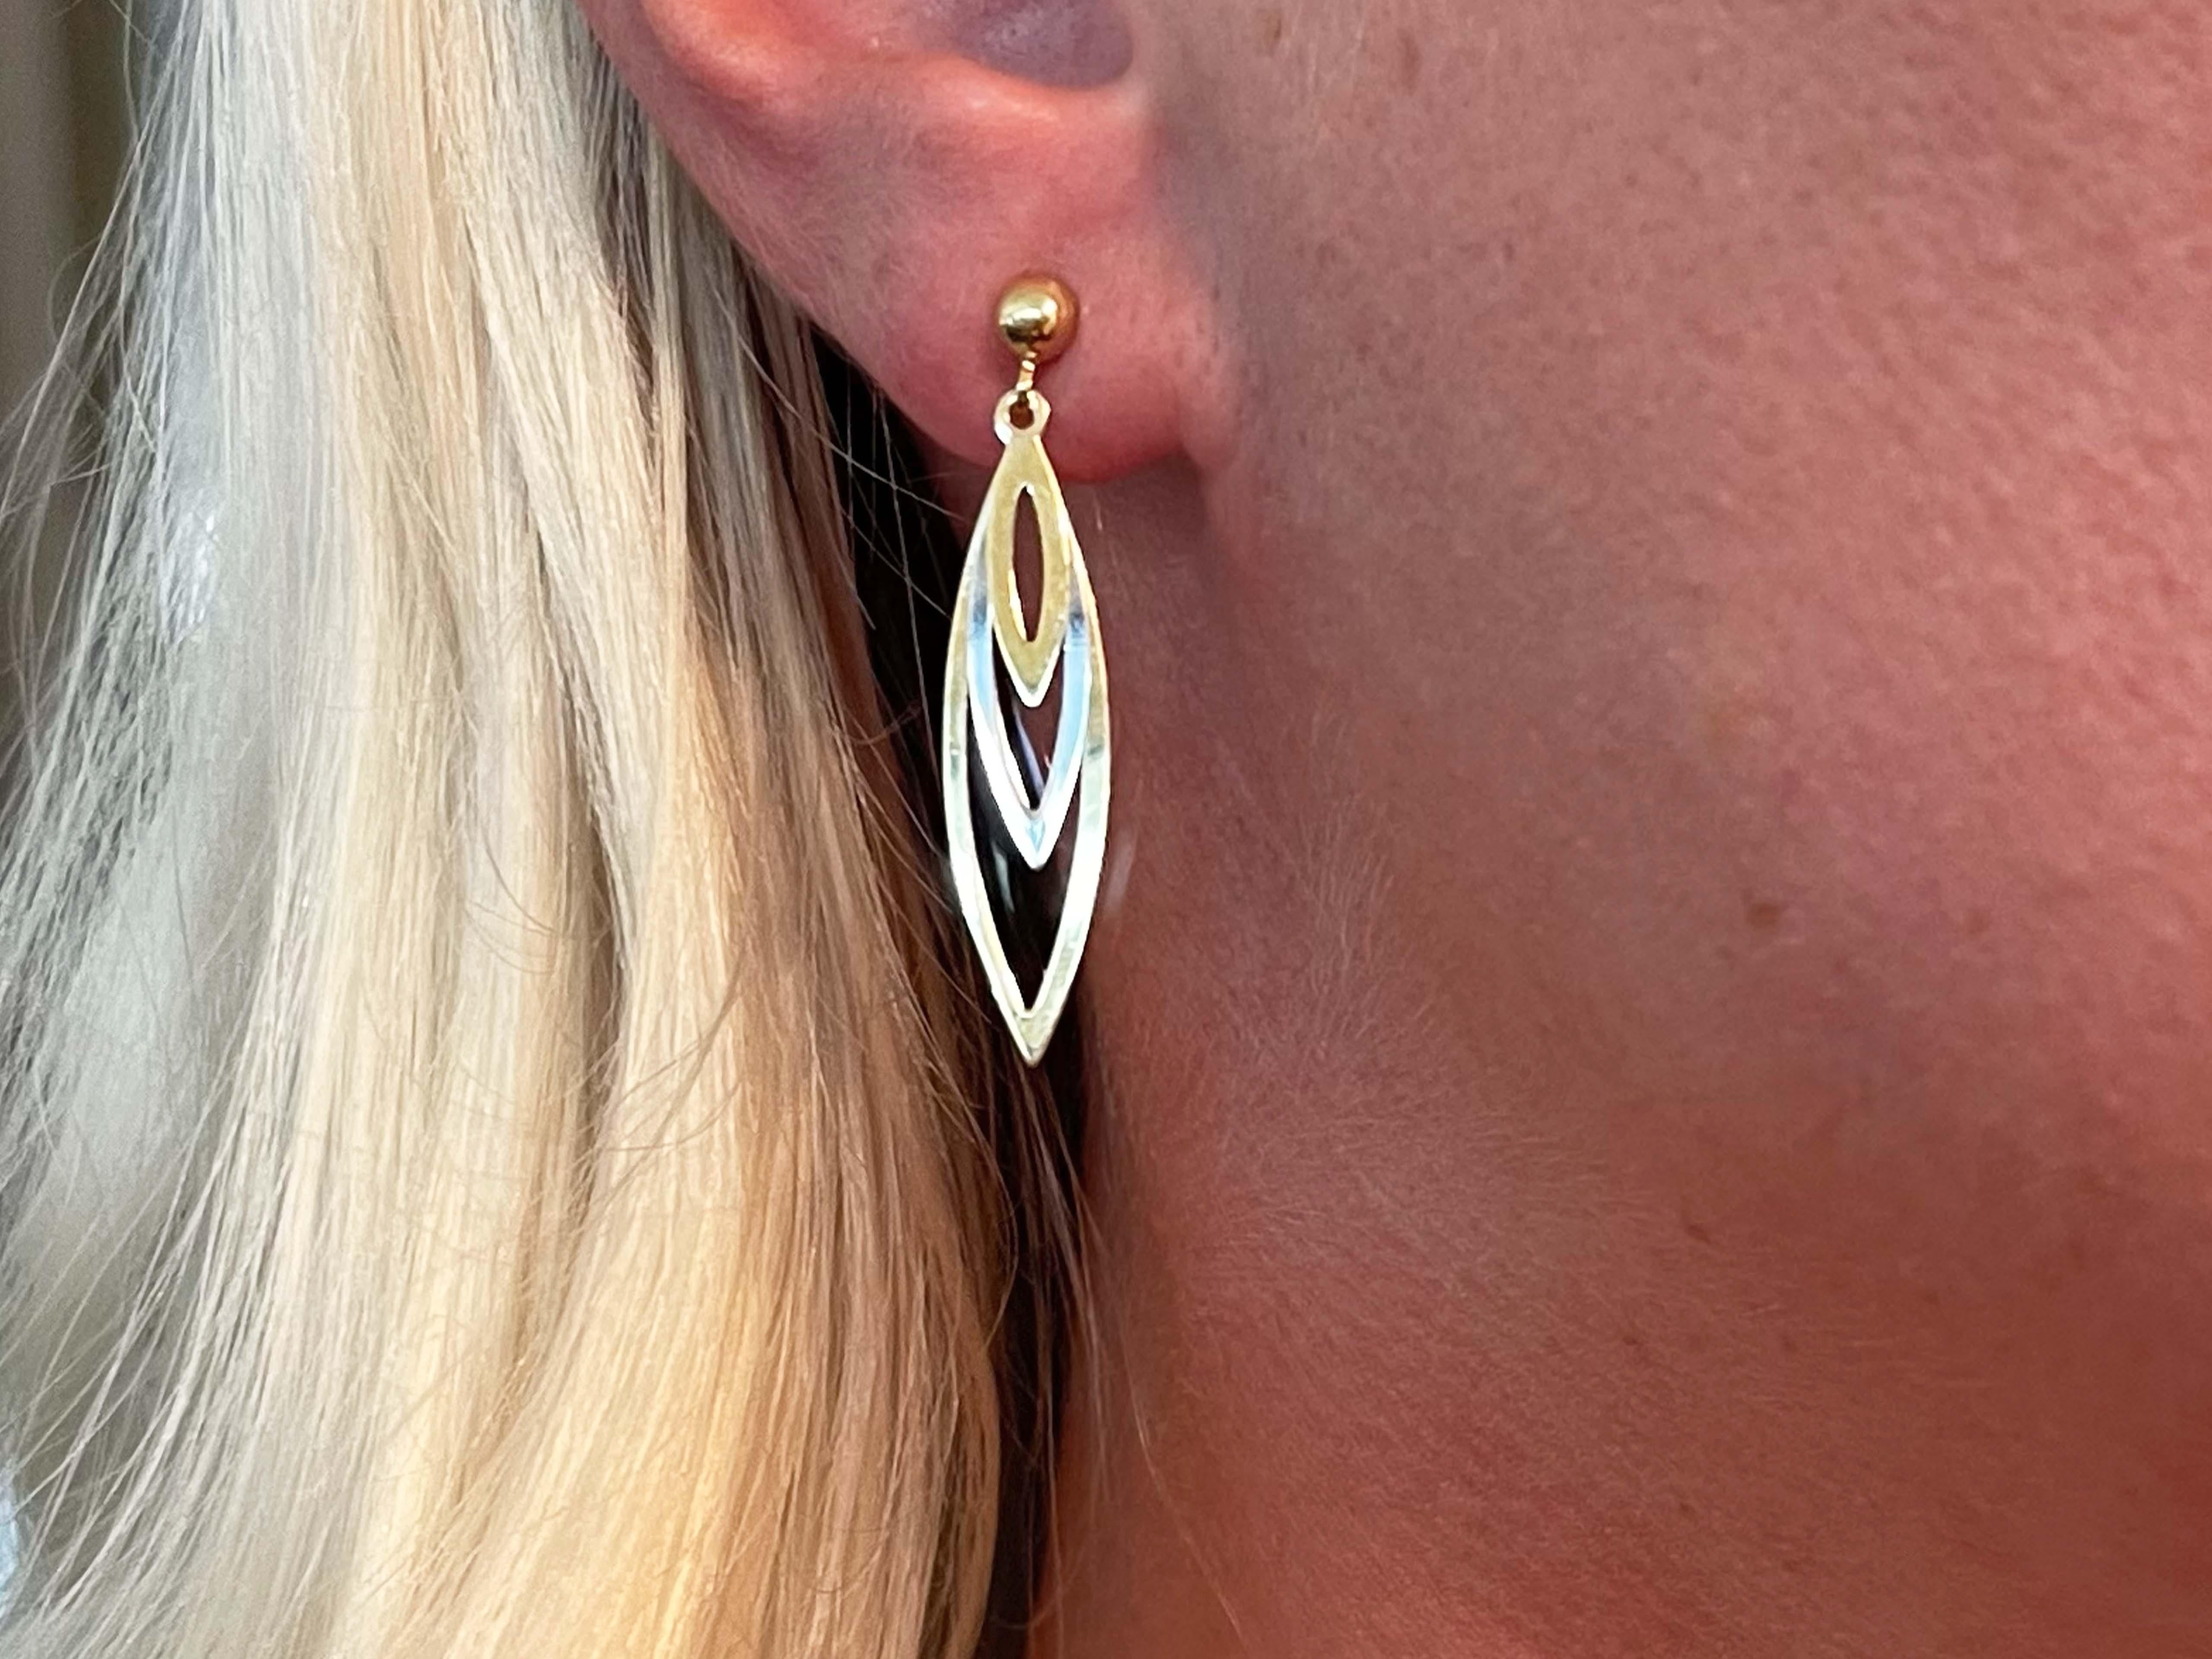 Earrings Specifications:

Metal: 18K White and Yellow Gold

Total Weight: 2.5 Grams

Earring Length: ~1.4